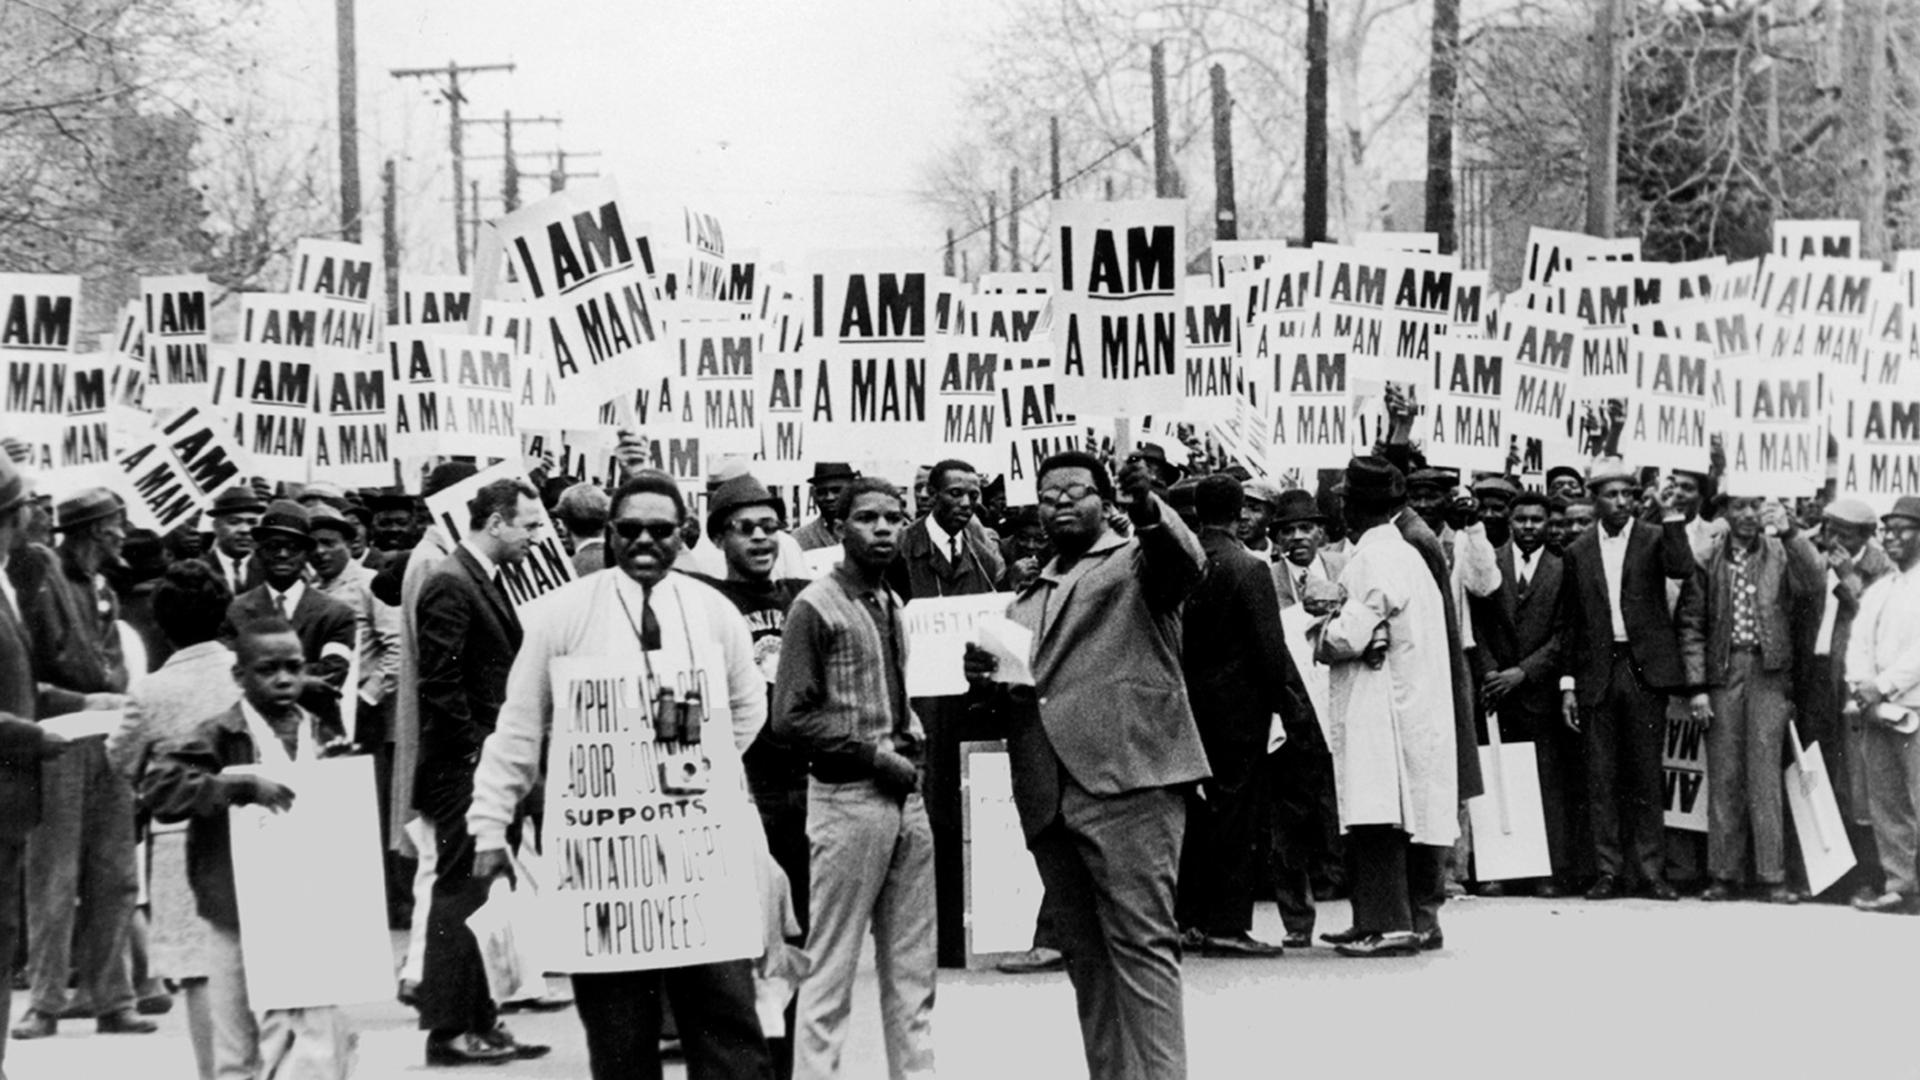 Love and Solidarity: James Lawson and Nonviolence In The Search For Workers' Rights